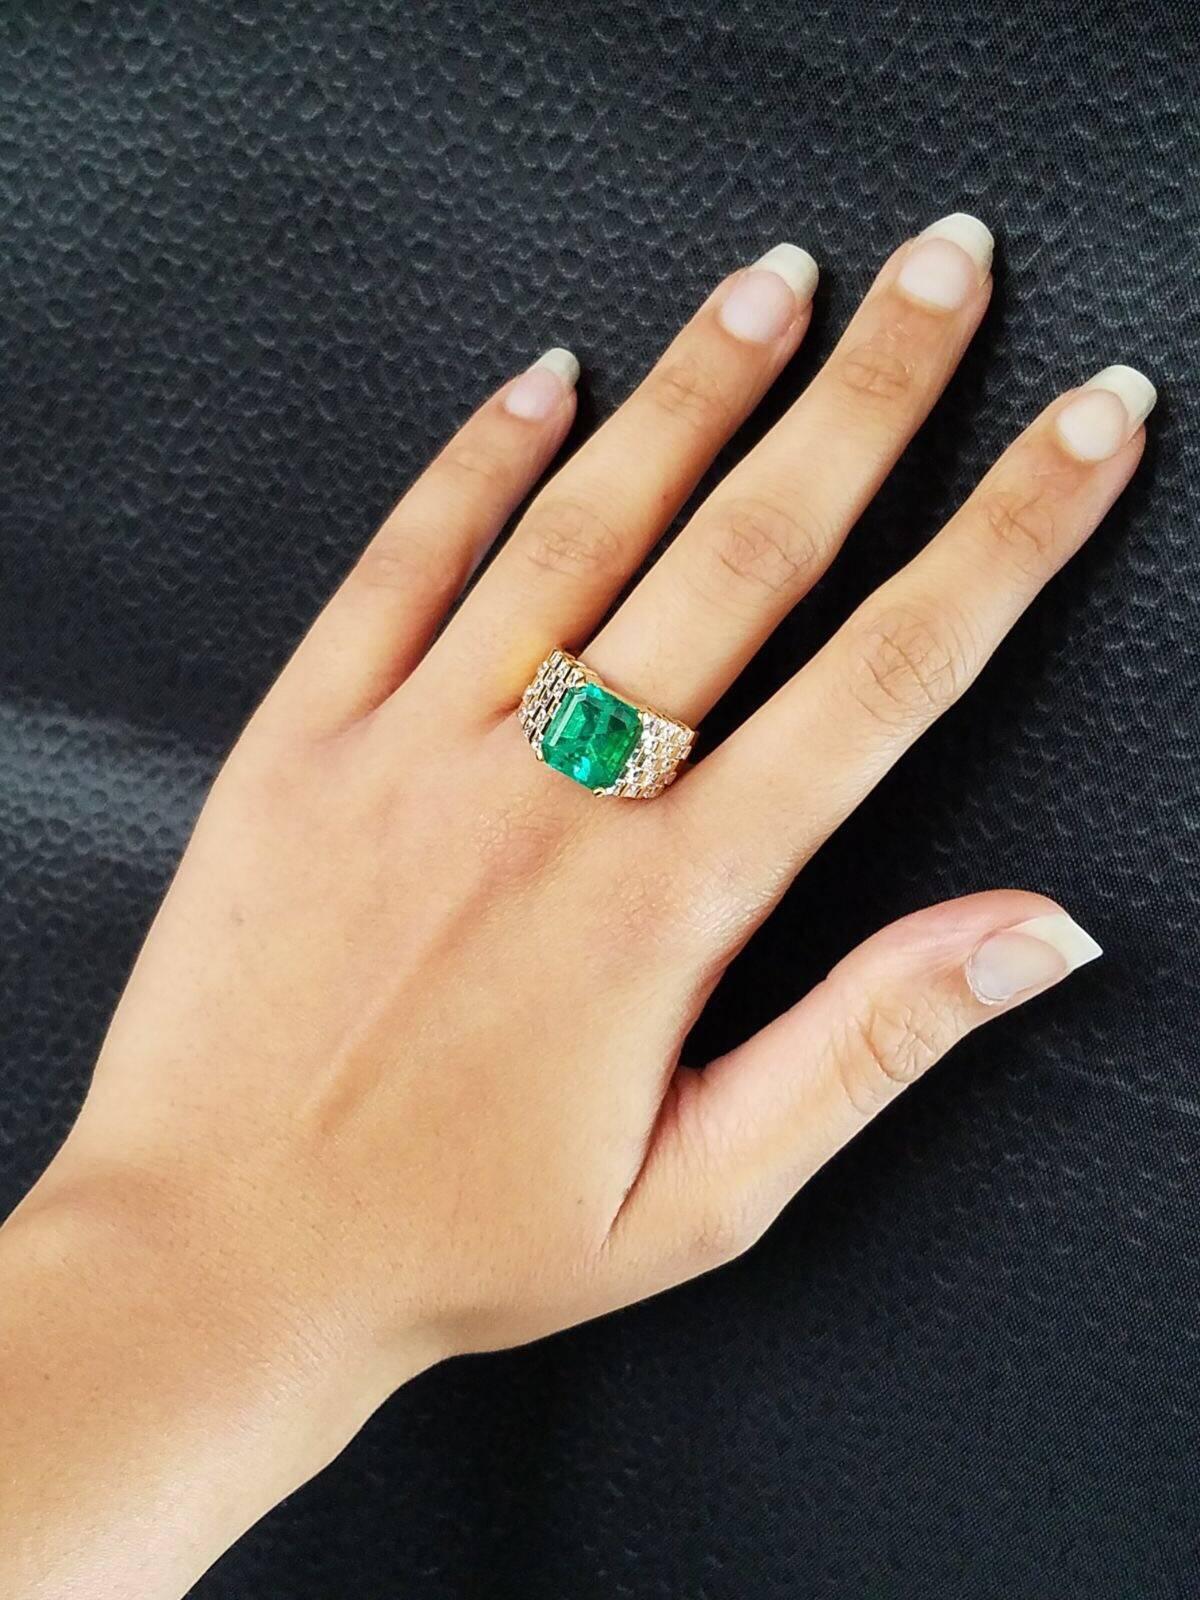 Women's or Men's 5.61 Carat Colombian Emerald and Diamond Cocktail Ring